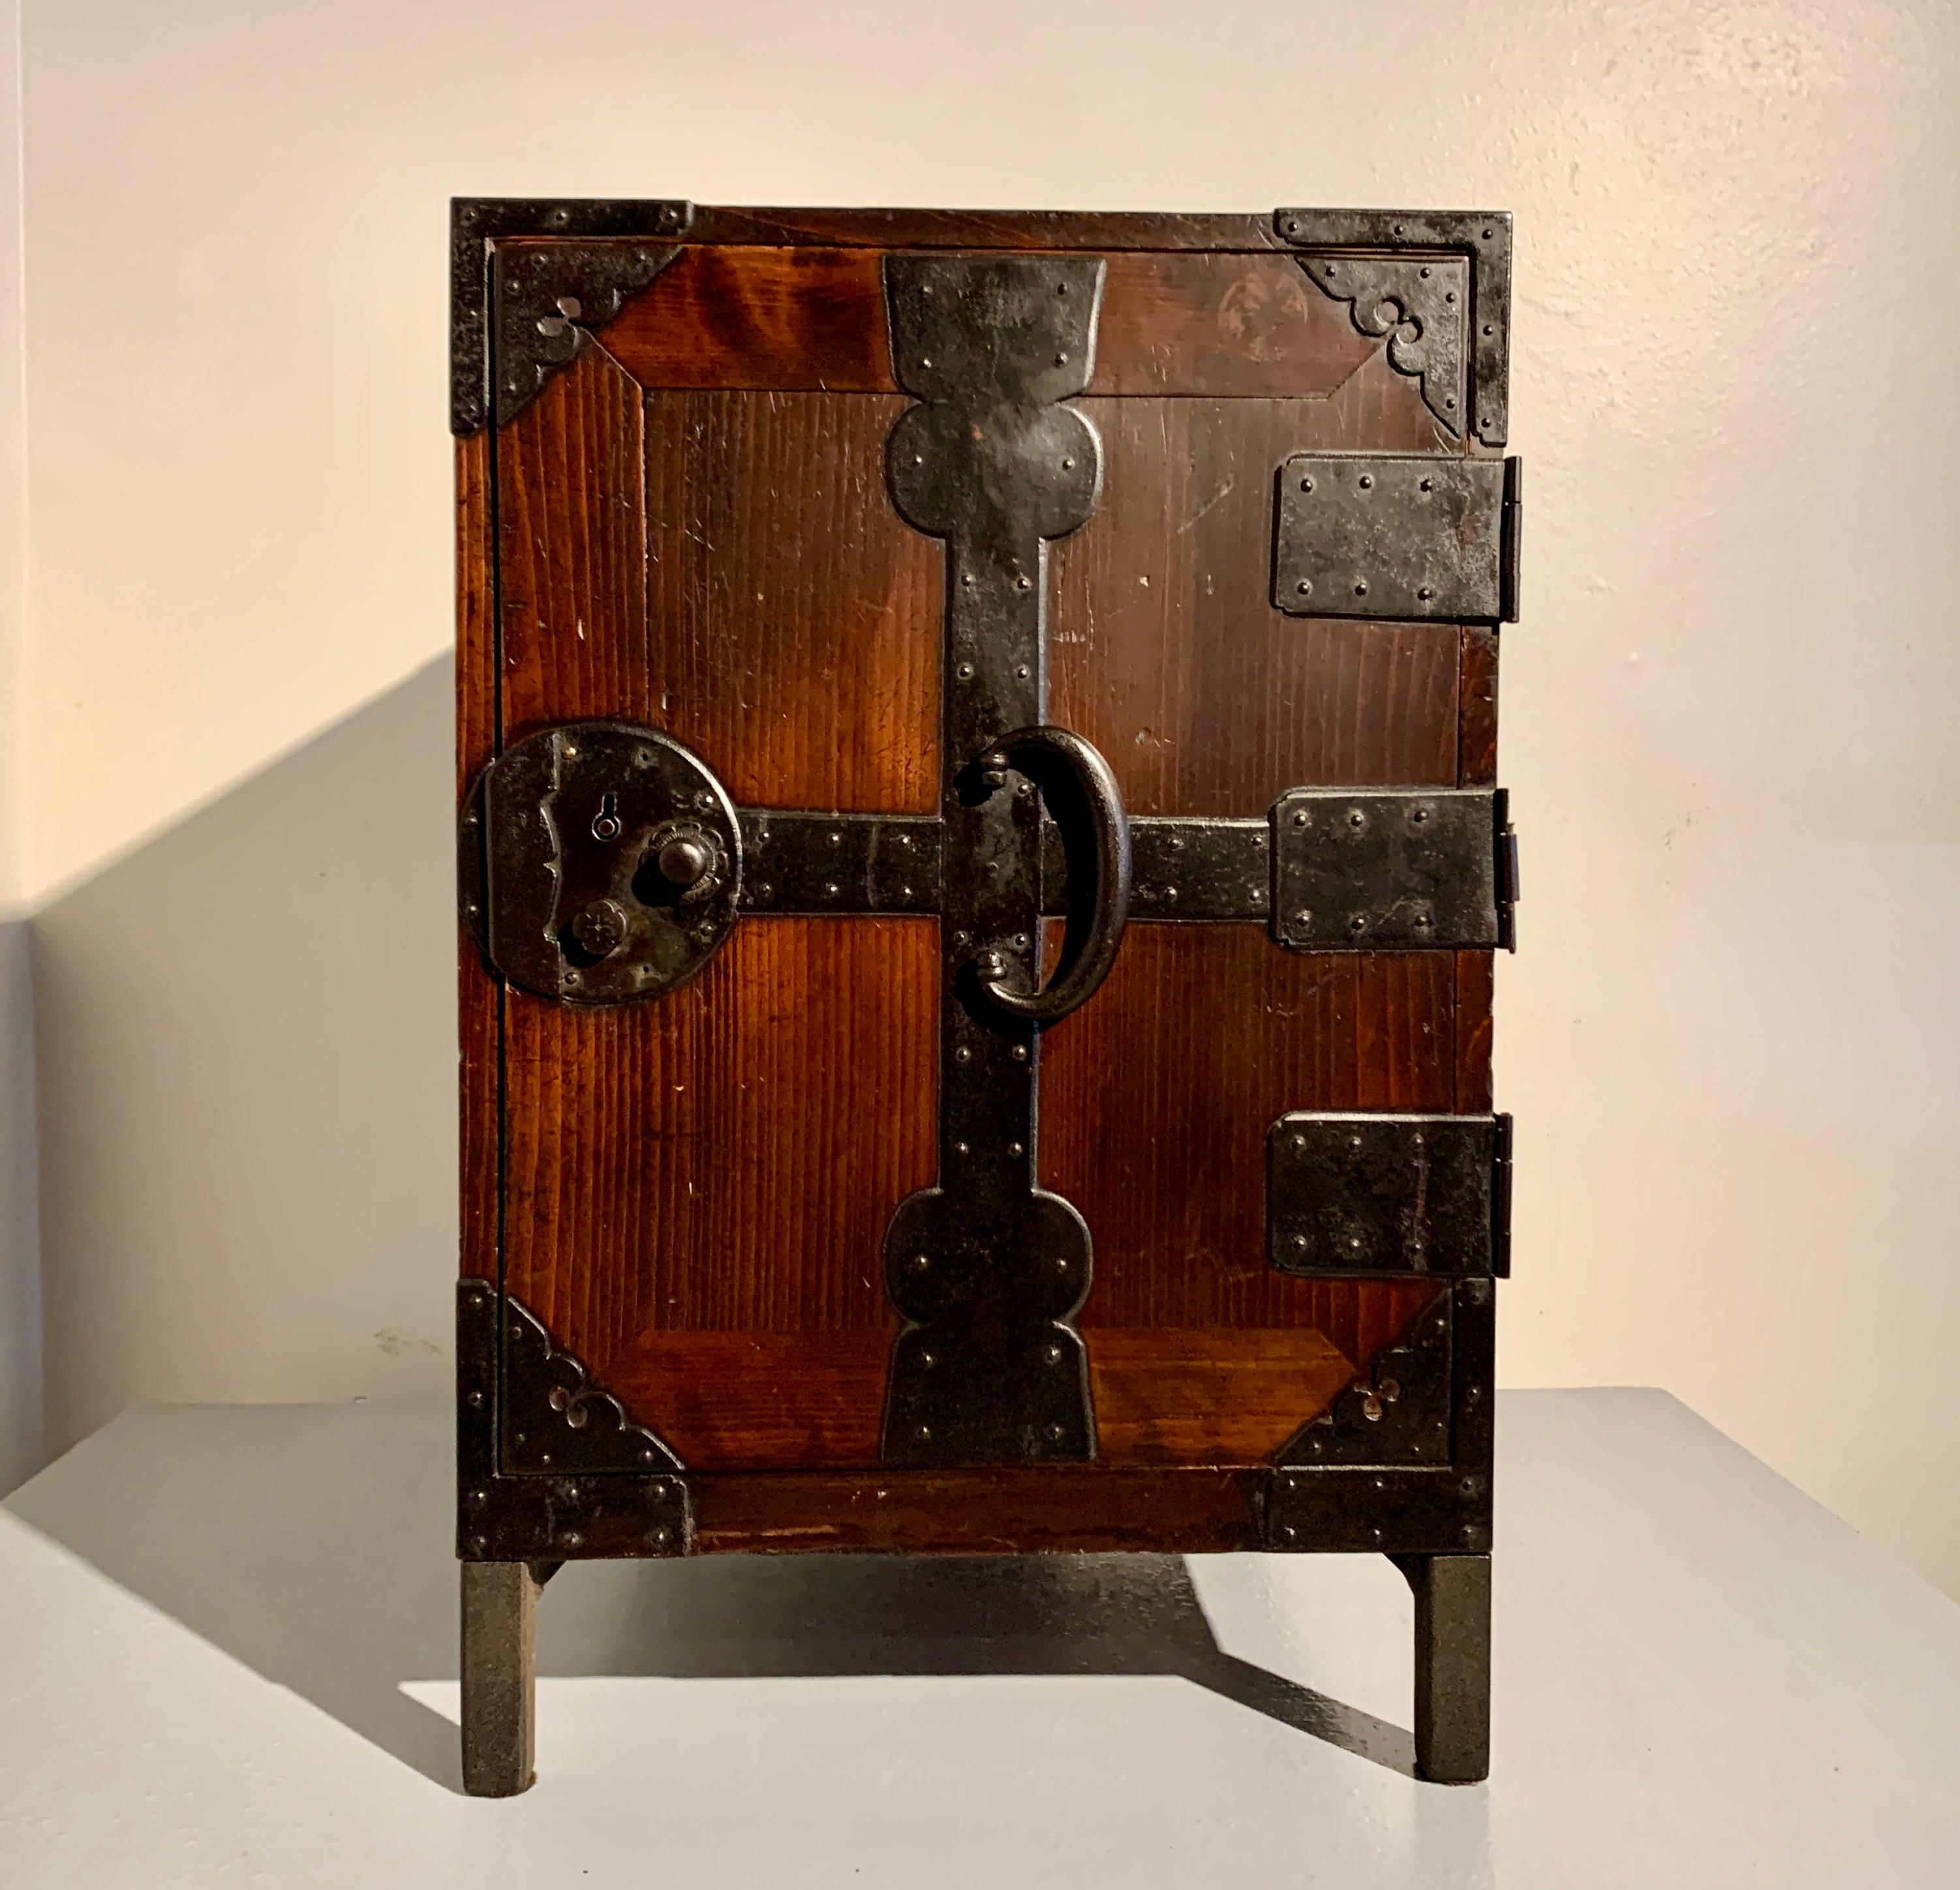 A simple and elegant Japanese sea chest, funa tansu, crafted of keyaki wood with iron fittings, mounted on a modern iron stand, Meiji Period, dated 1882, Japan.

This Japanese sea chest, or captain's chest, known as a funa tansu, features an